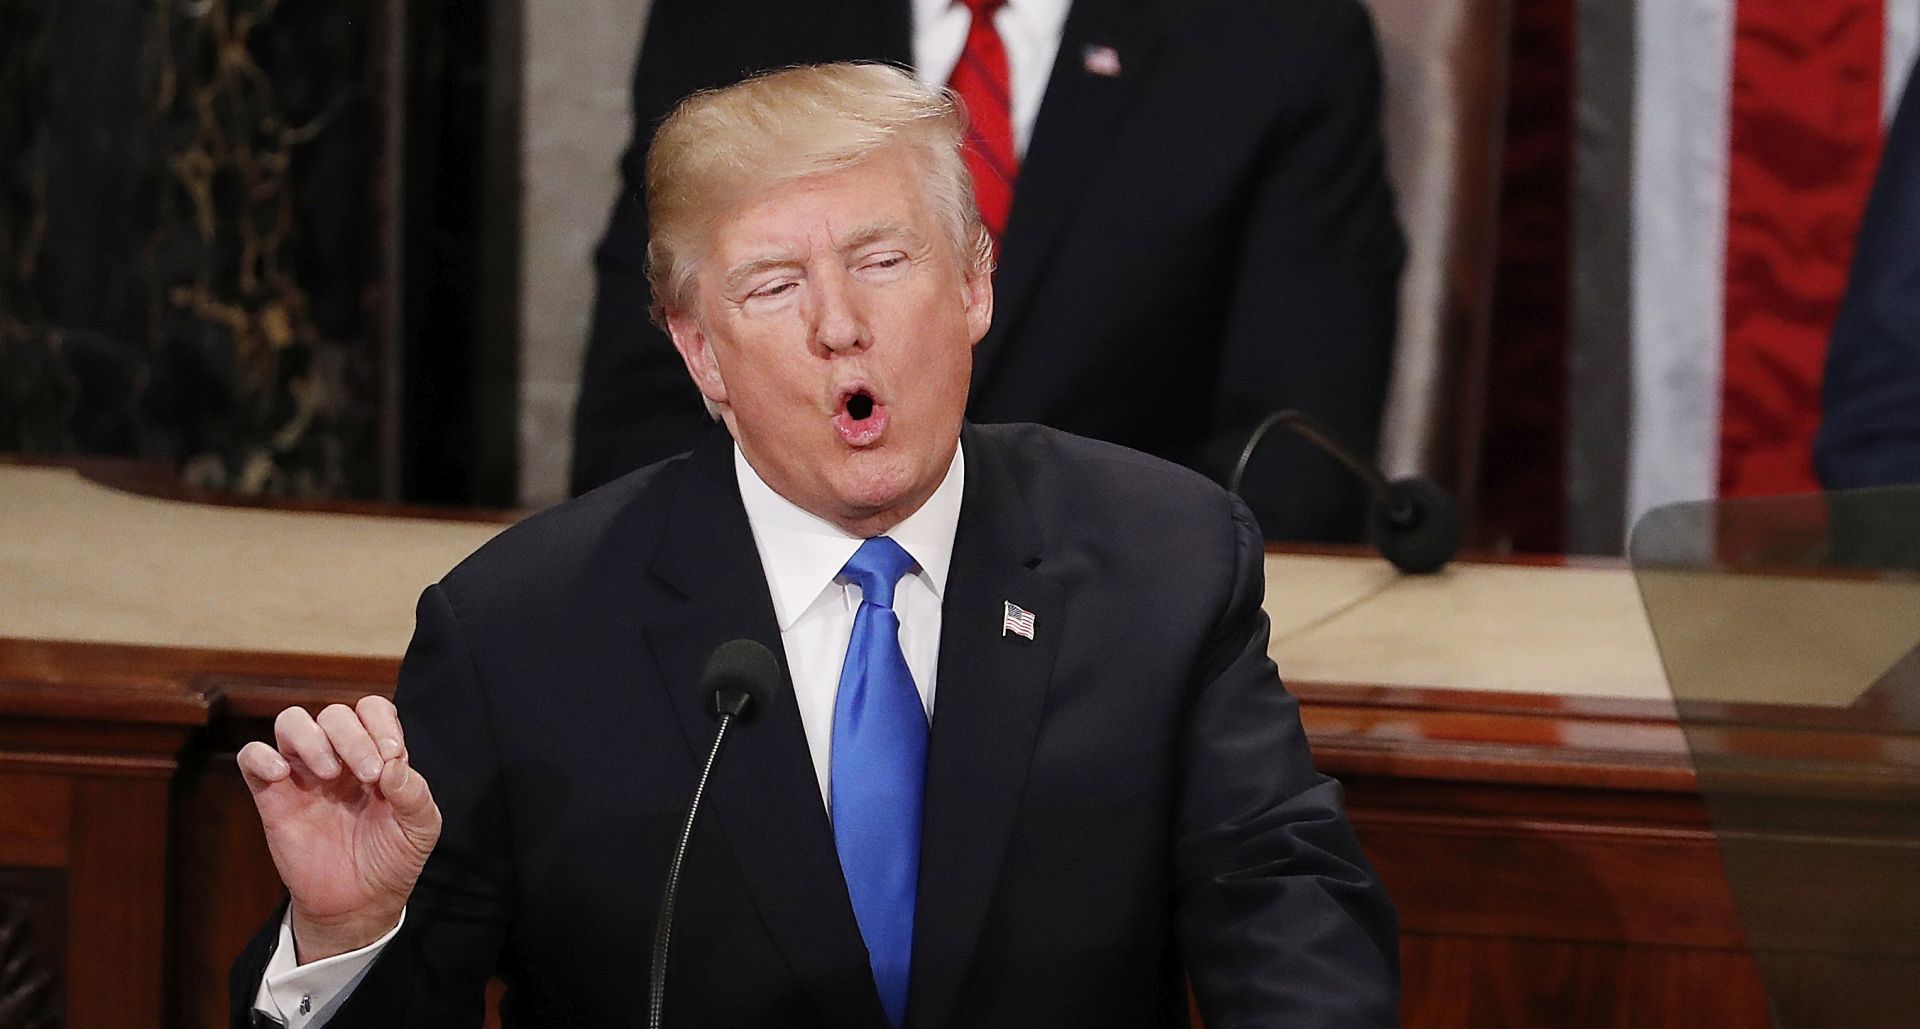 epa06487038 US President Donald J. Trump delivers his first State of the Union from the floor of the House of Representatives in Washington, DC, USA, 30 January 2018.  EPA/SHAWN THEW